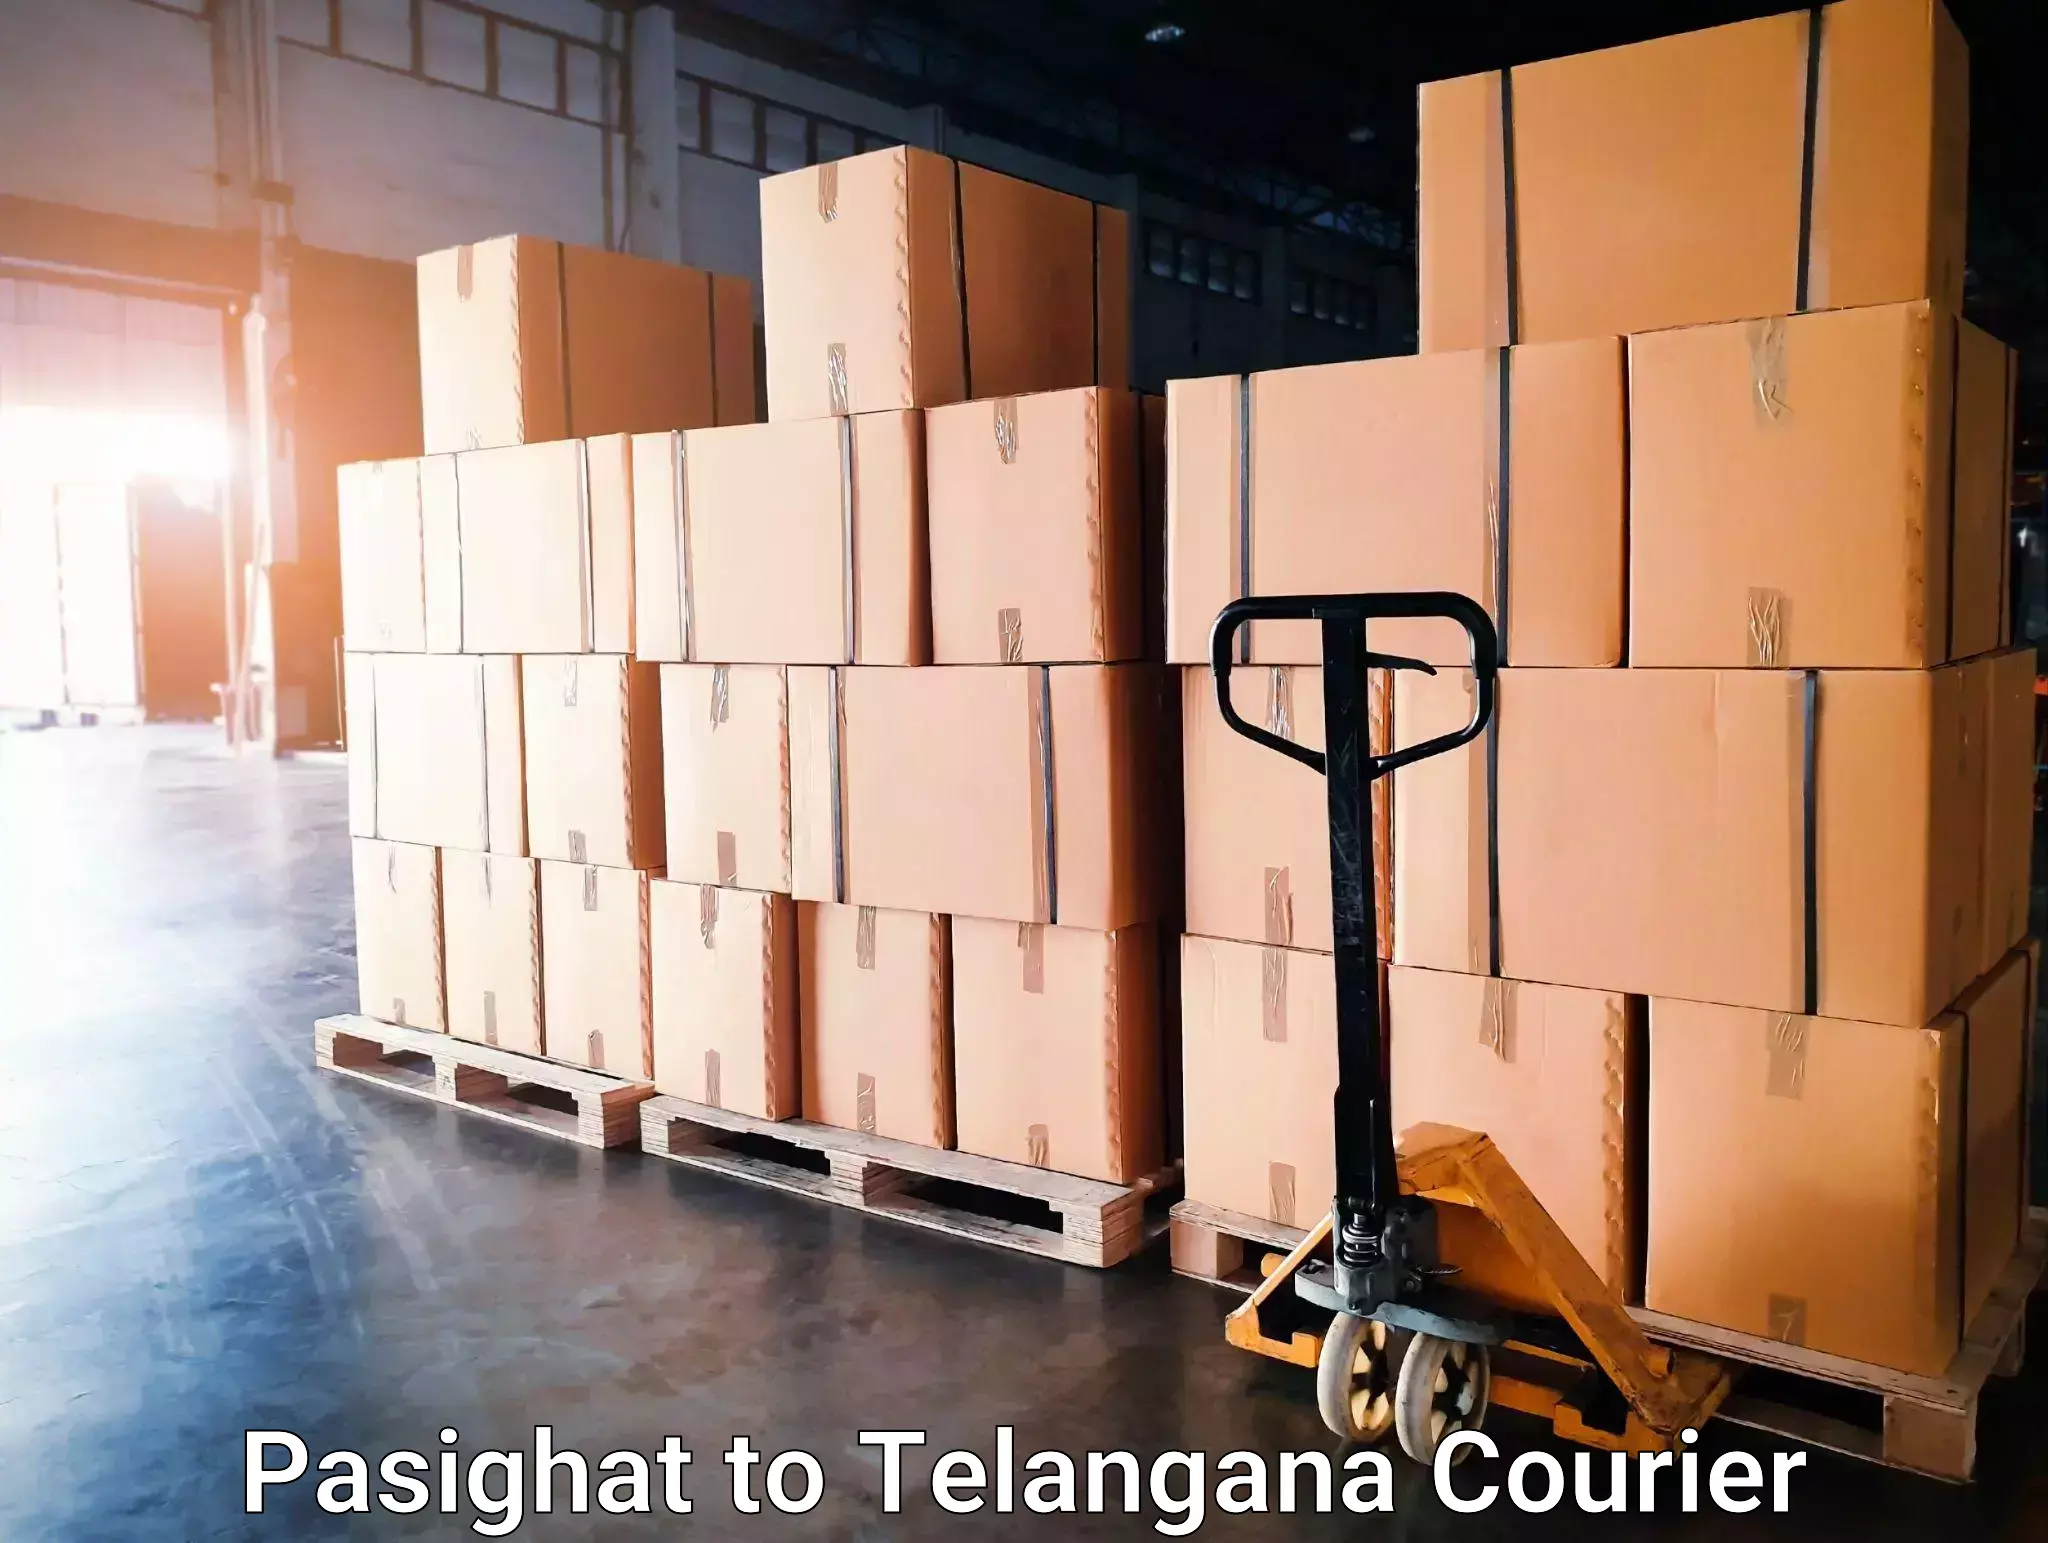 Next-day freight services in Pasighat to Professor Jayashankar Telangana State Agricultural University Hyderabad